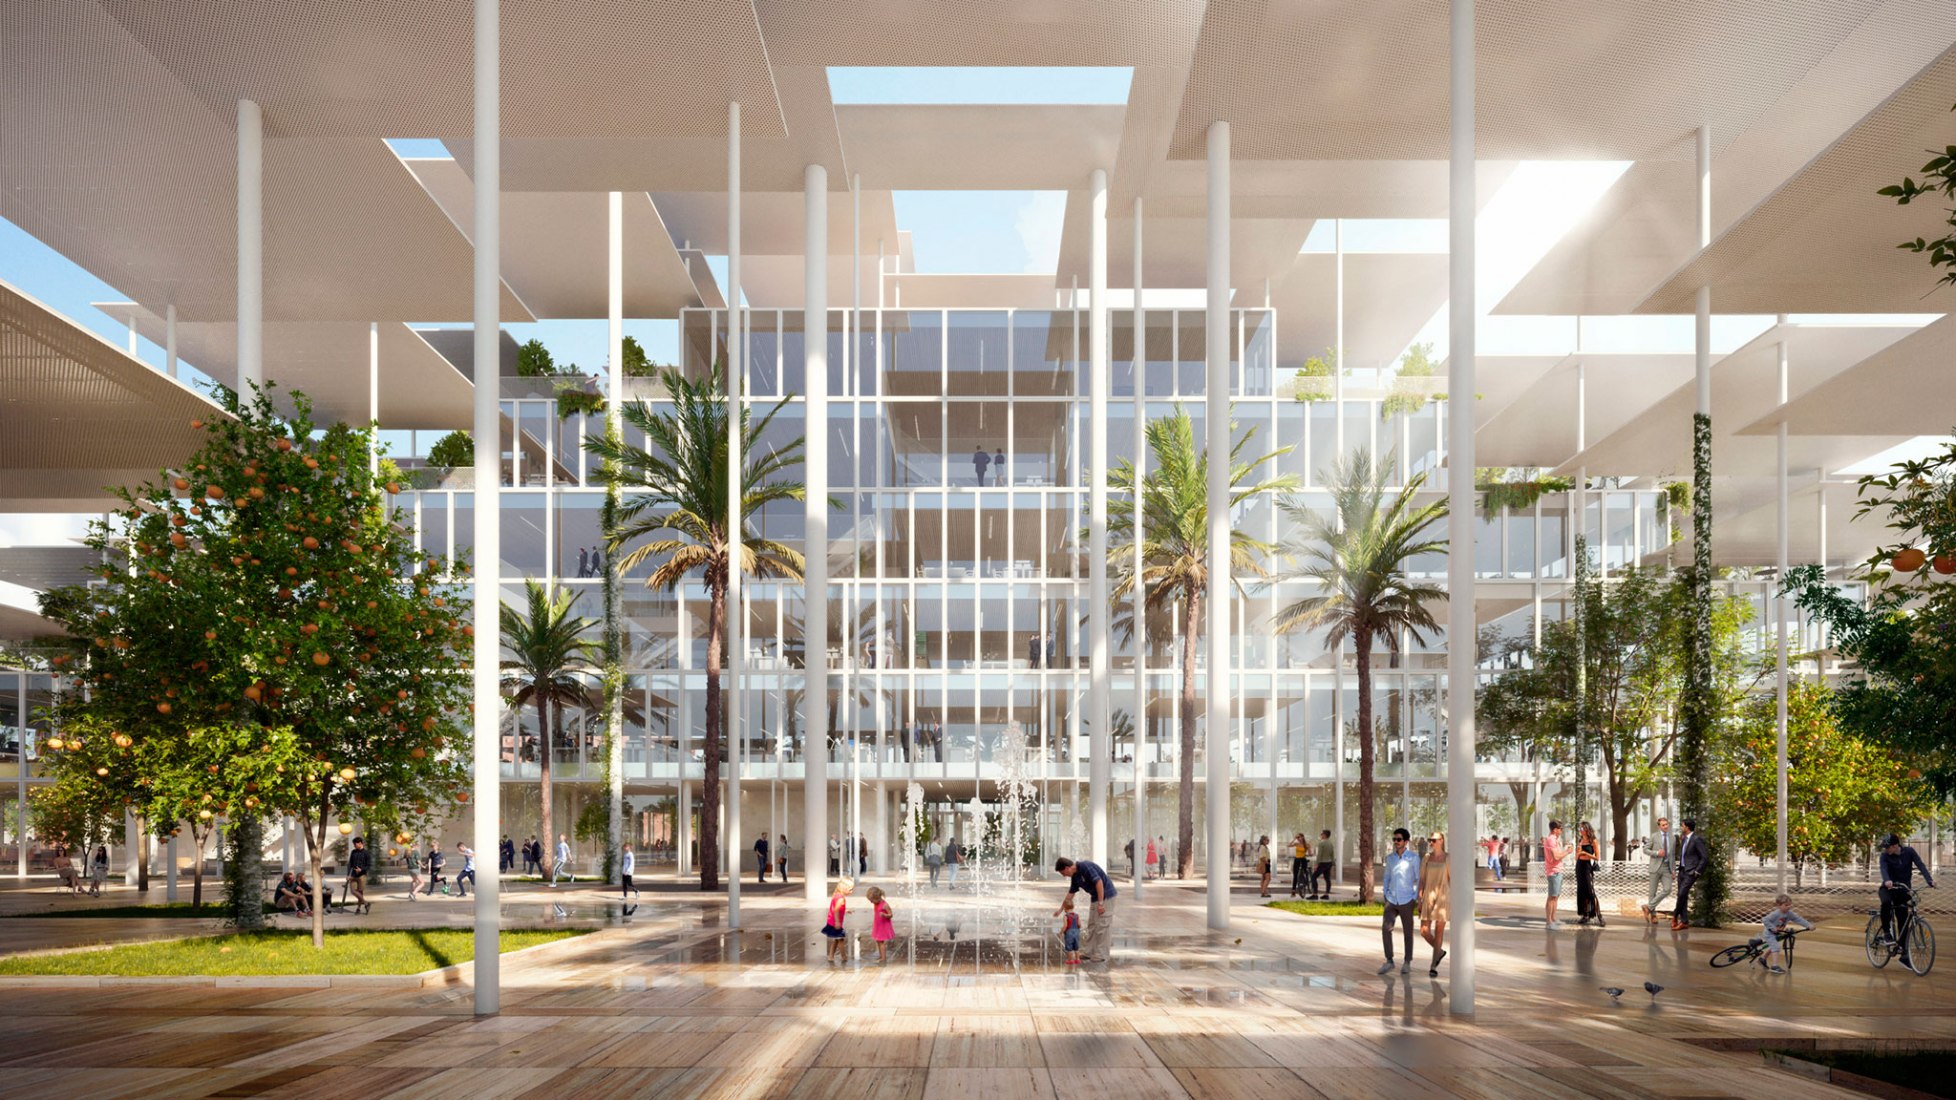 New Joint Research Center of the European Commission in Seville by BIG. Rendering by Play-Time.